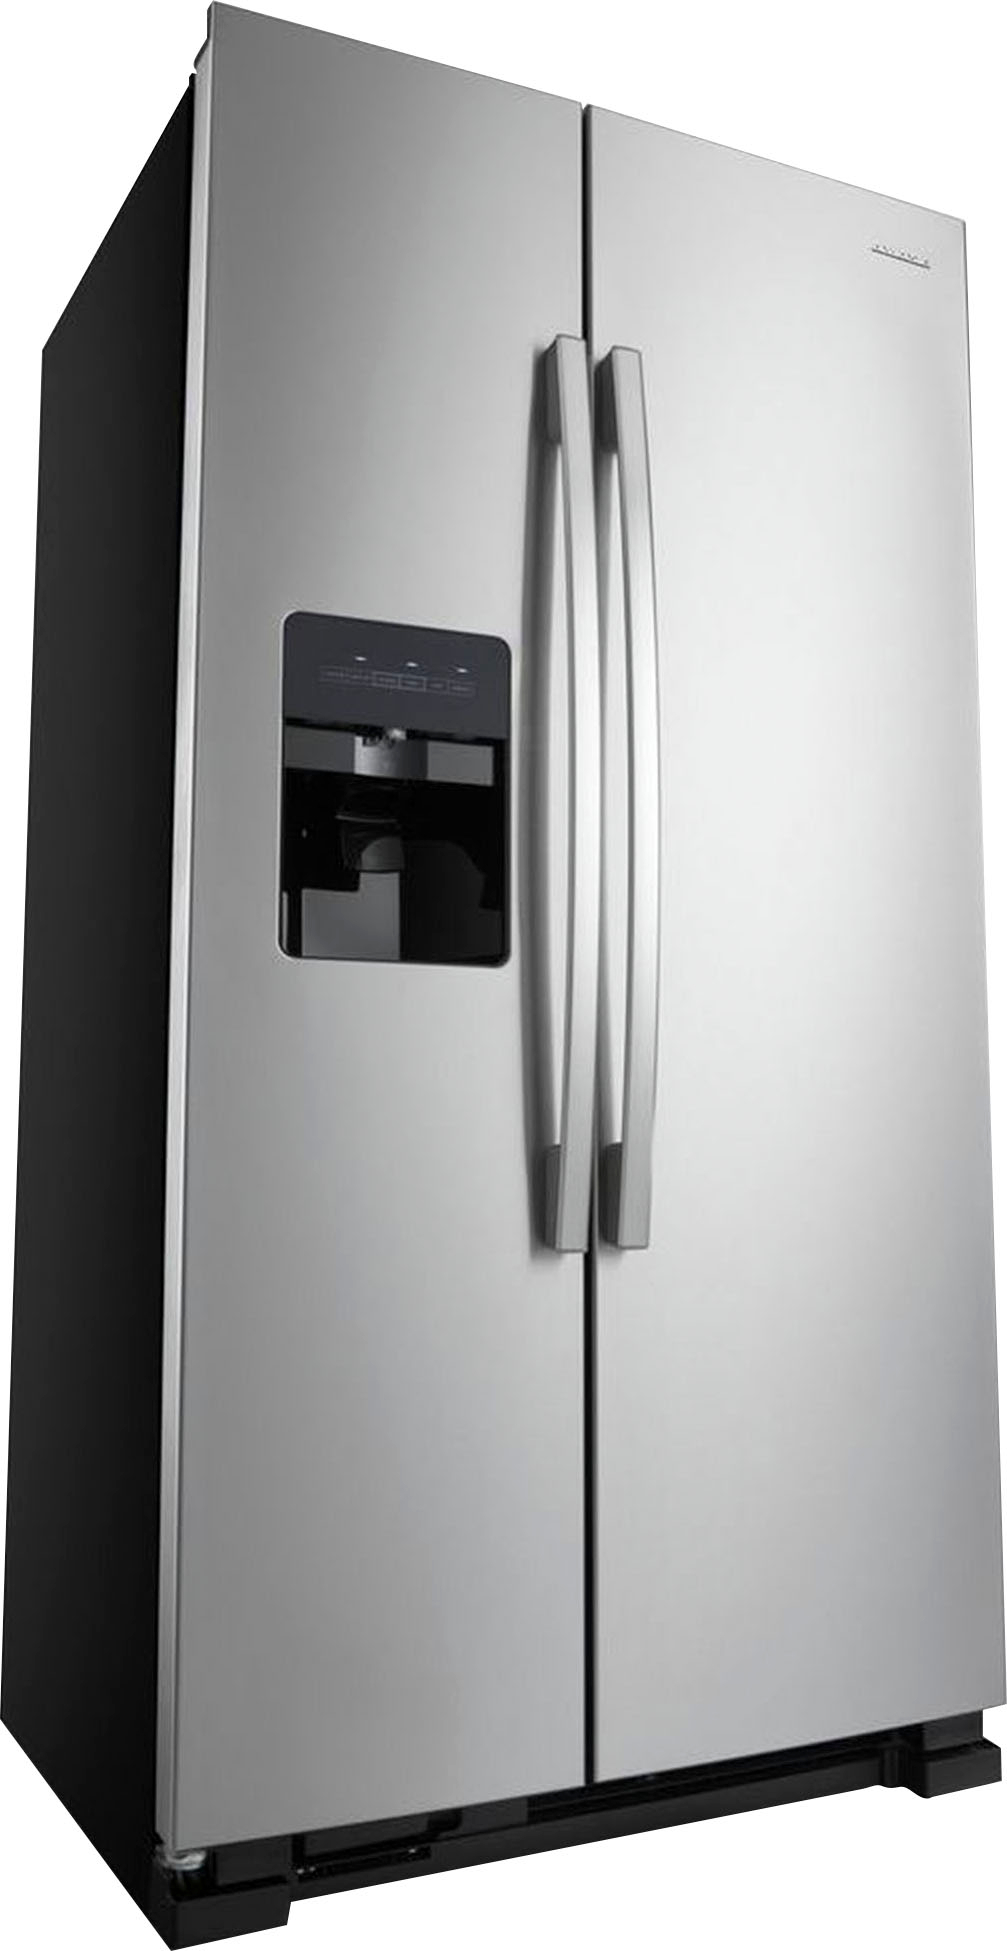 Amana 21.4 Cu. Ft. Side-by-Side Refrigerator Stainless Steel ASI2175GRS ...